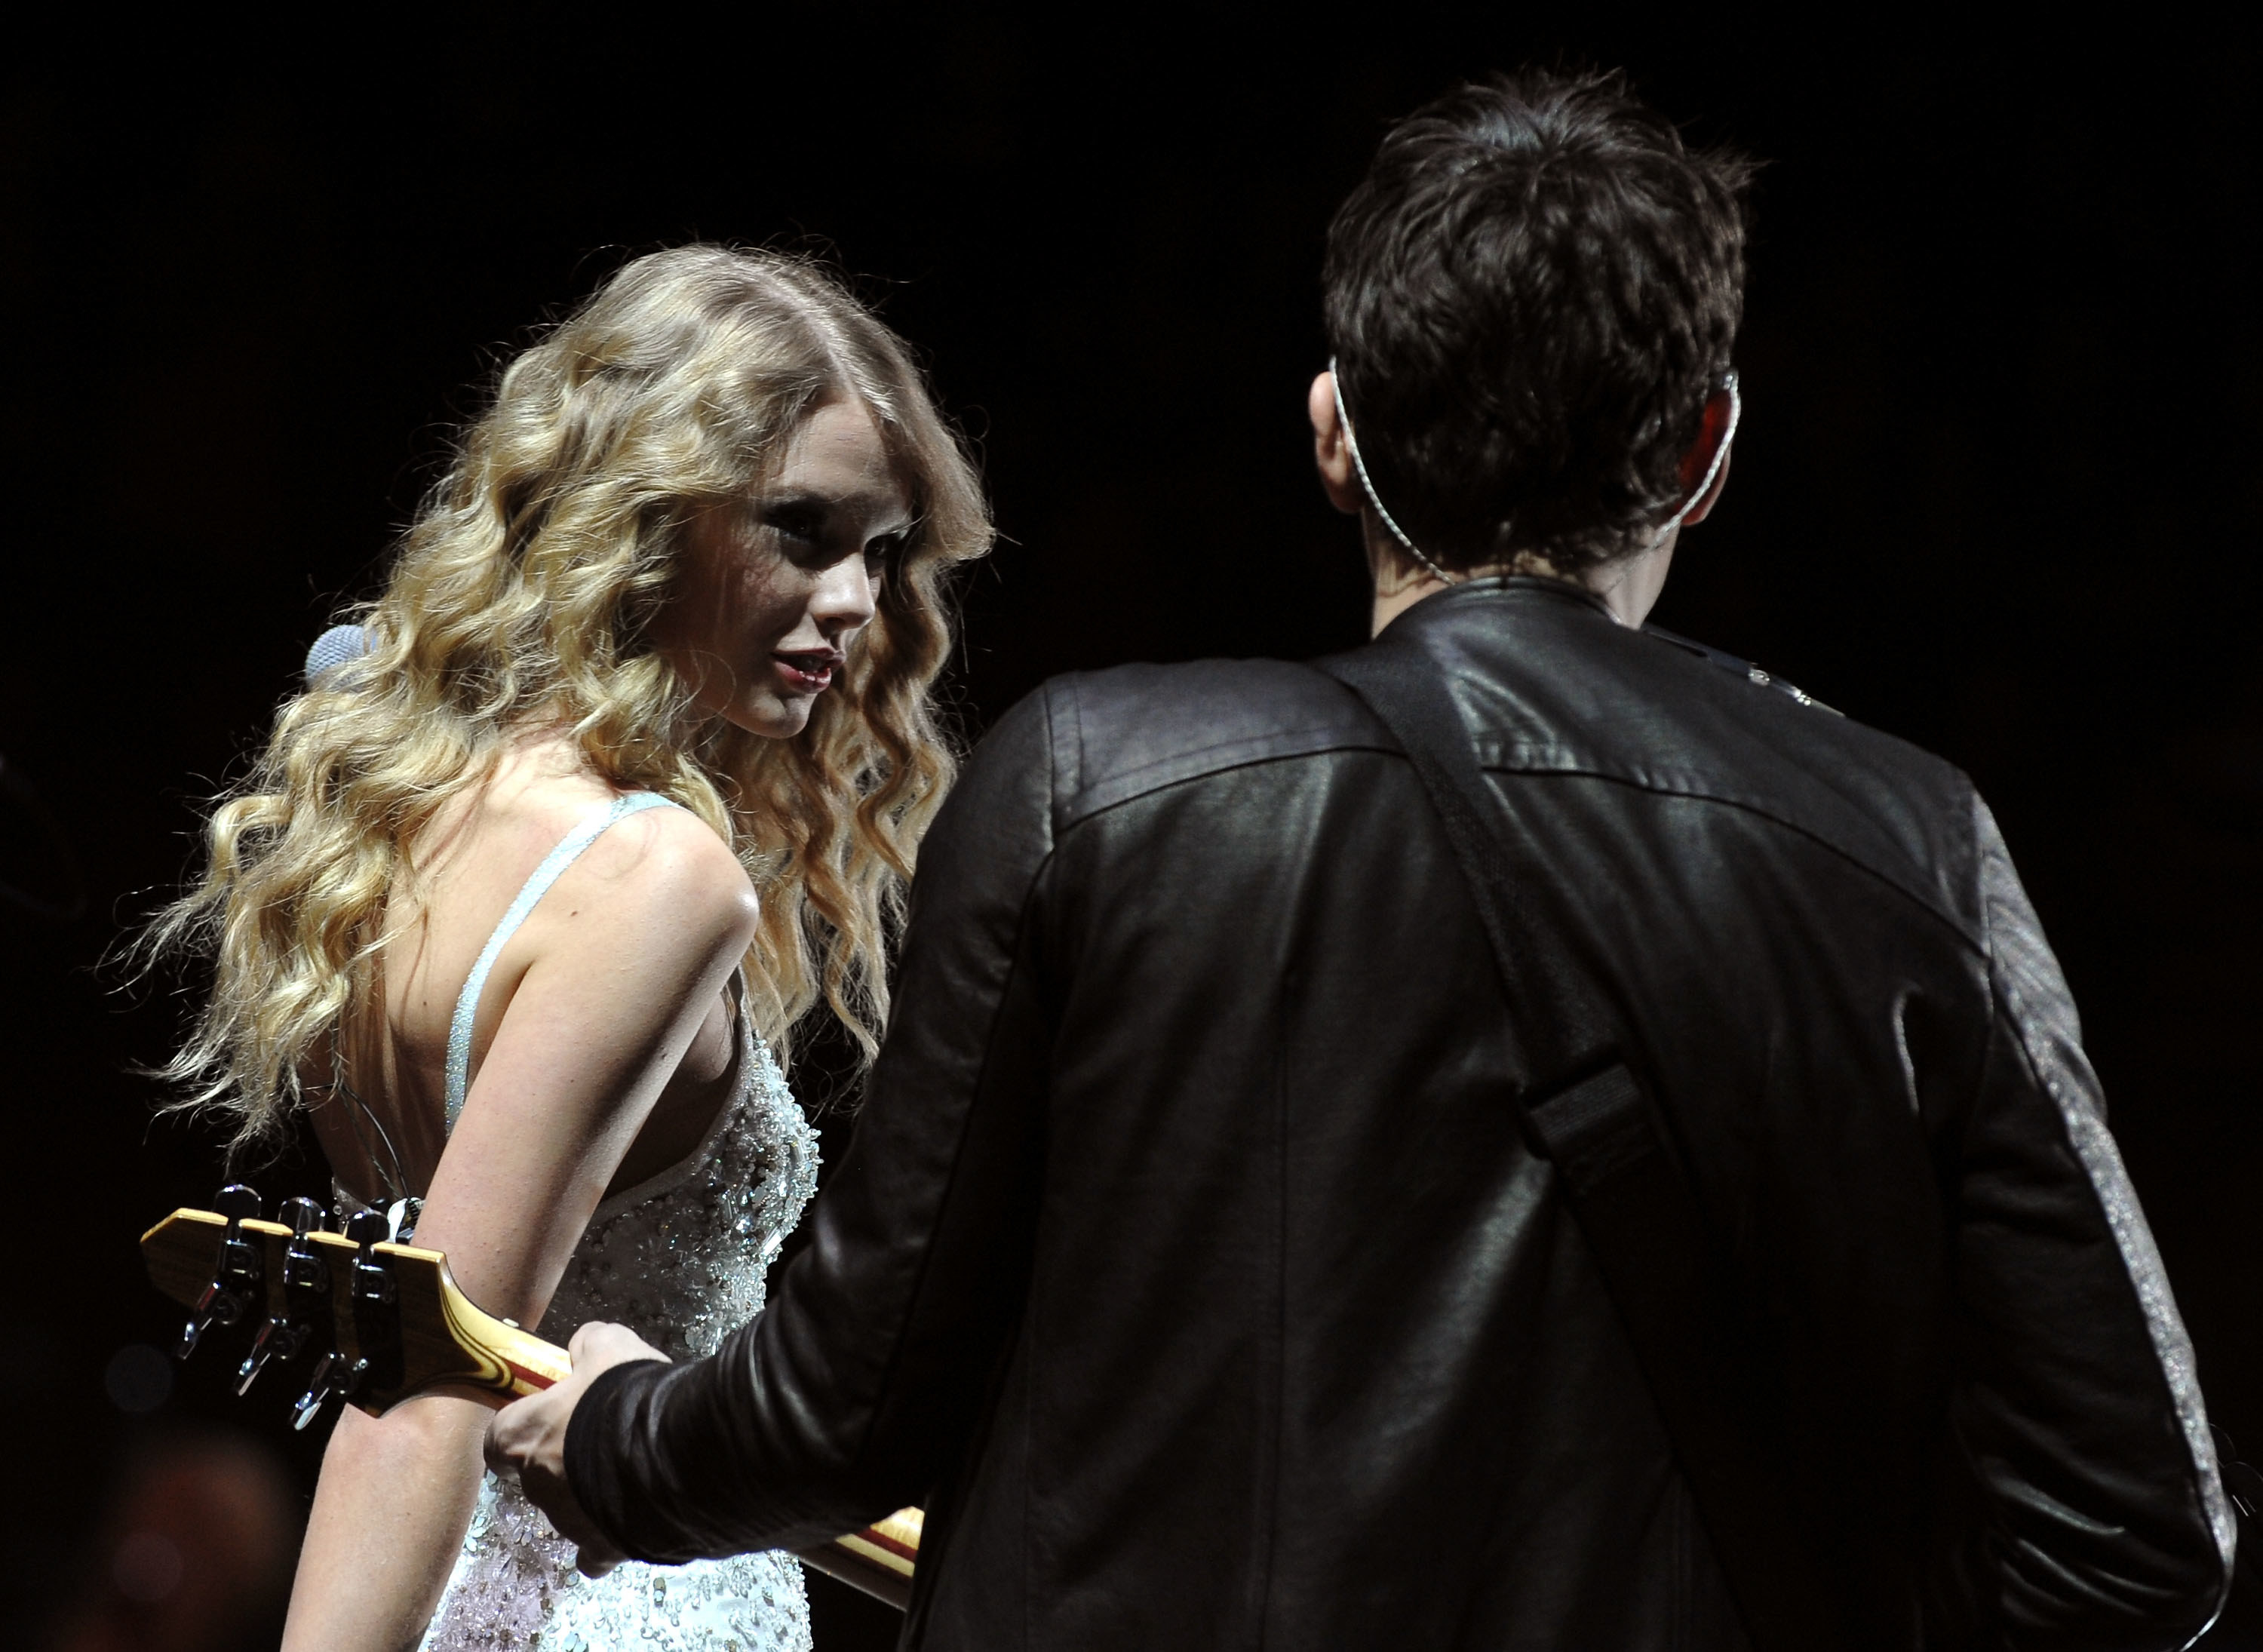 Taylor looks at John as he plays the guitar on stage